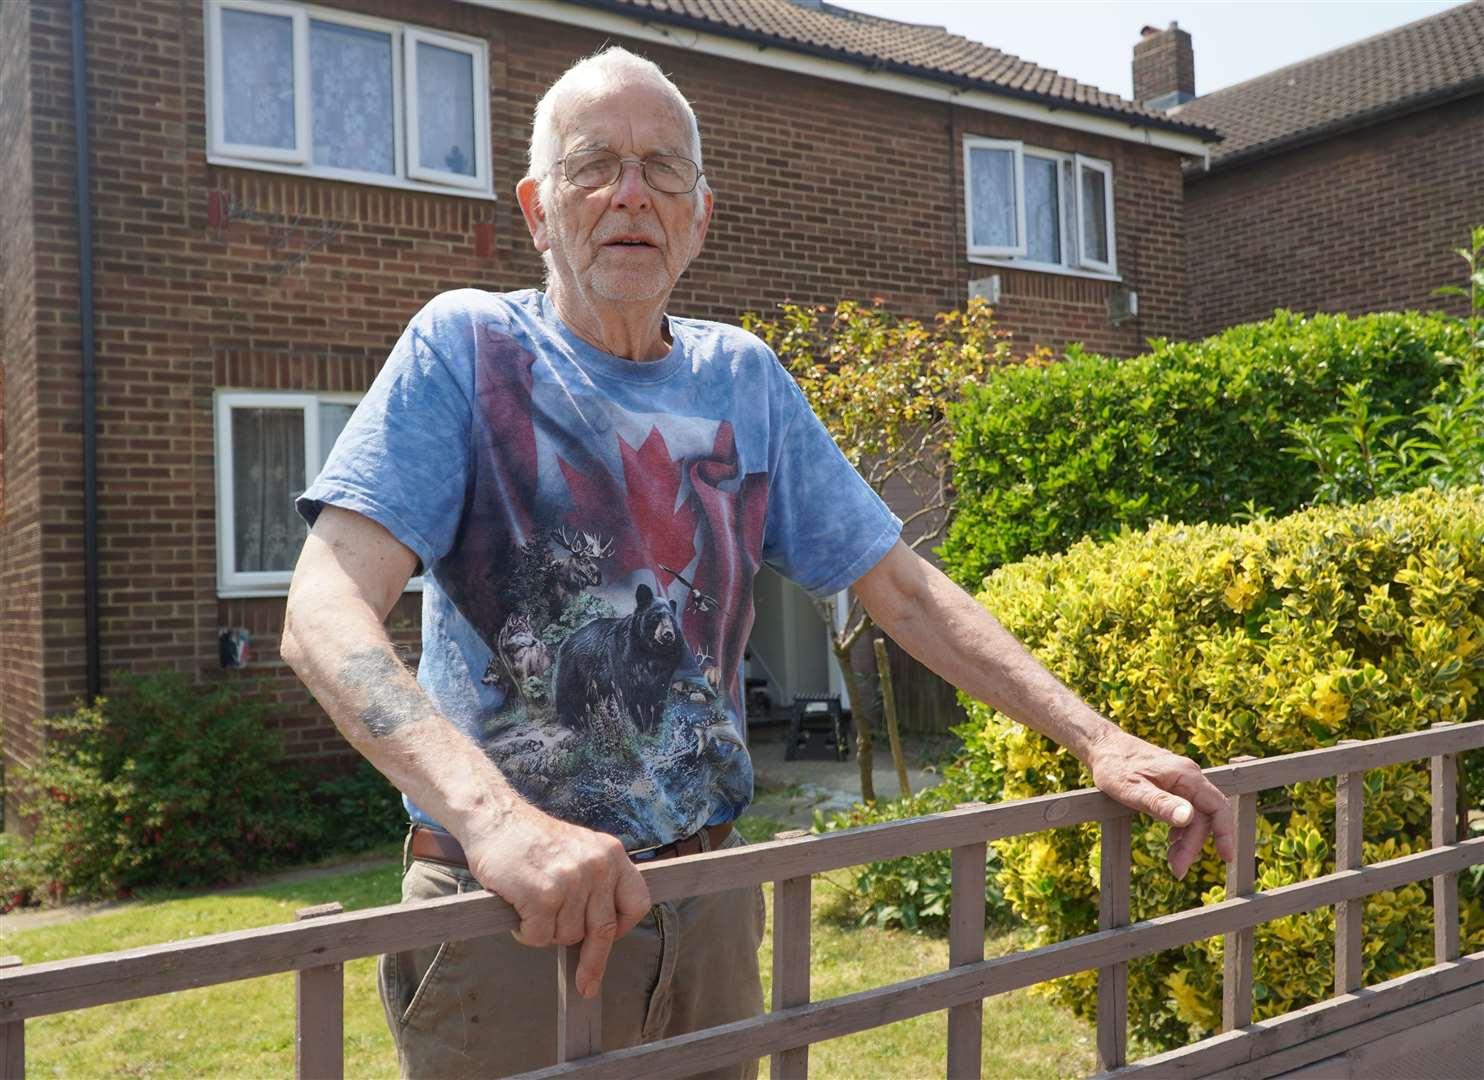 Bruch Stitchbury, 80, is concerned about the lorries